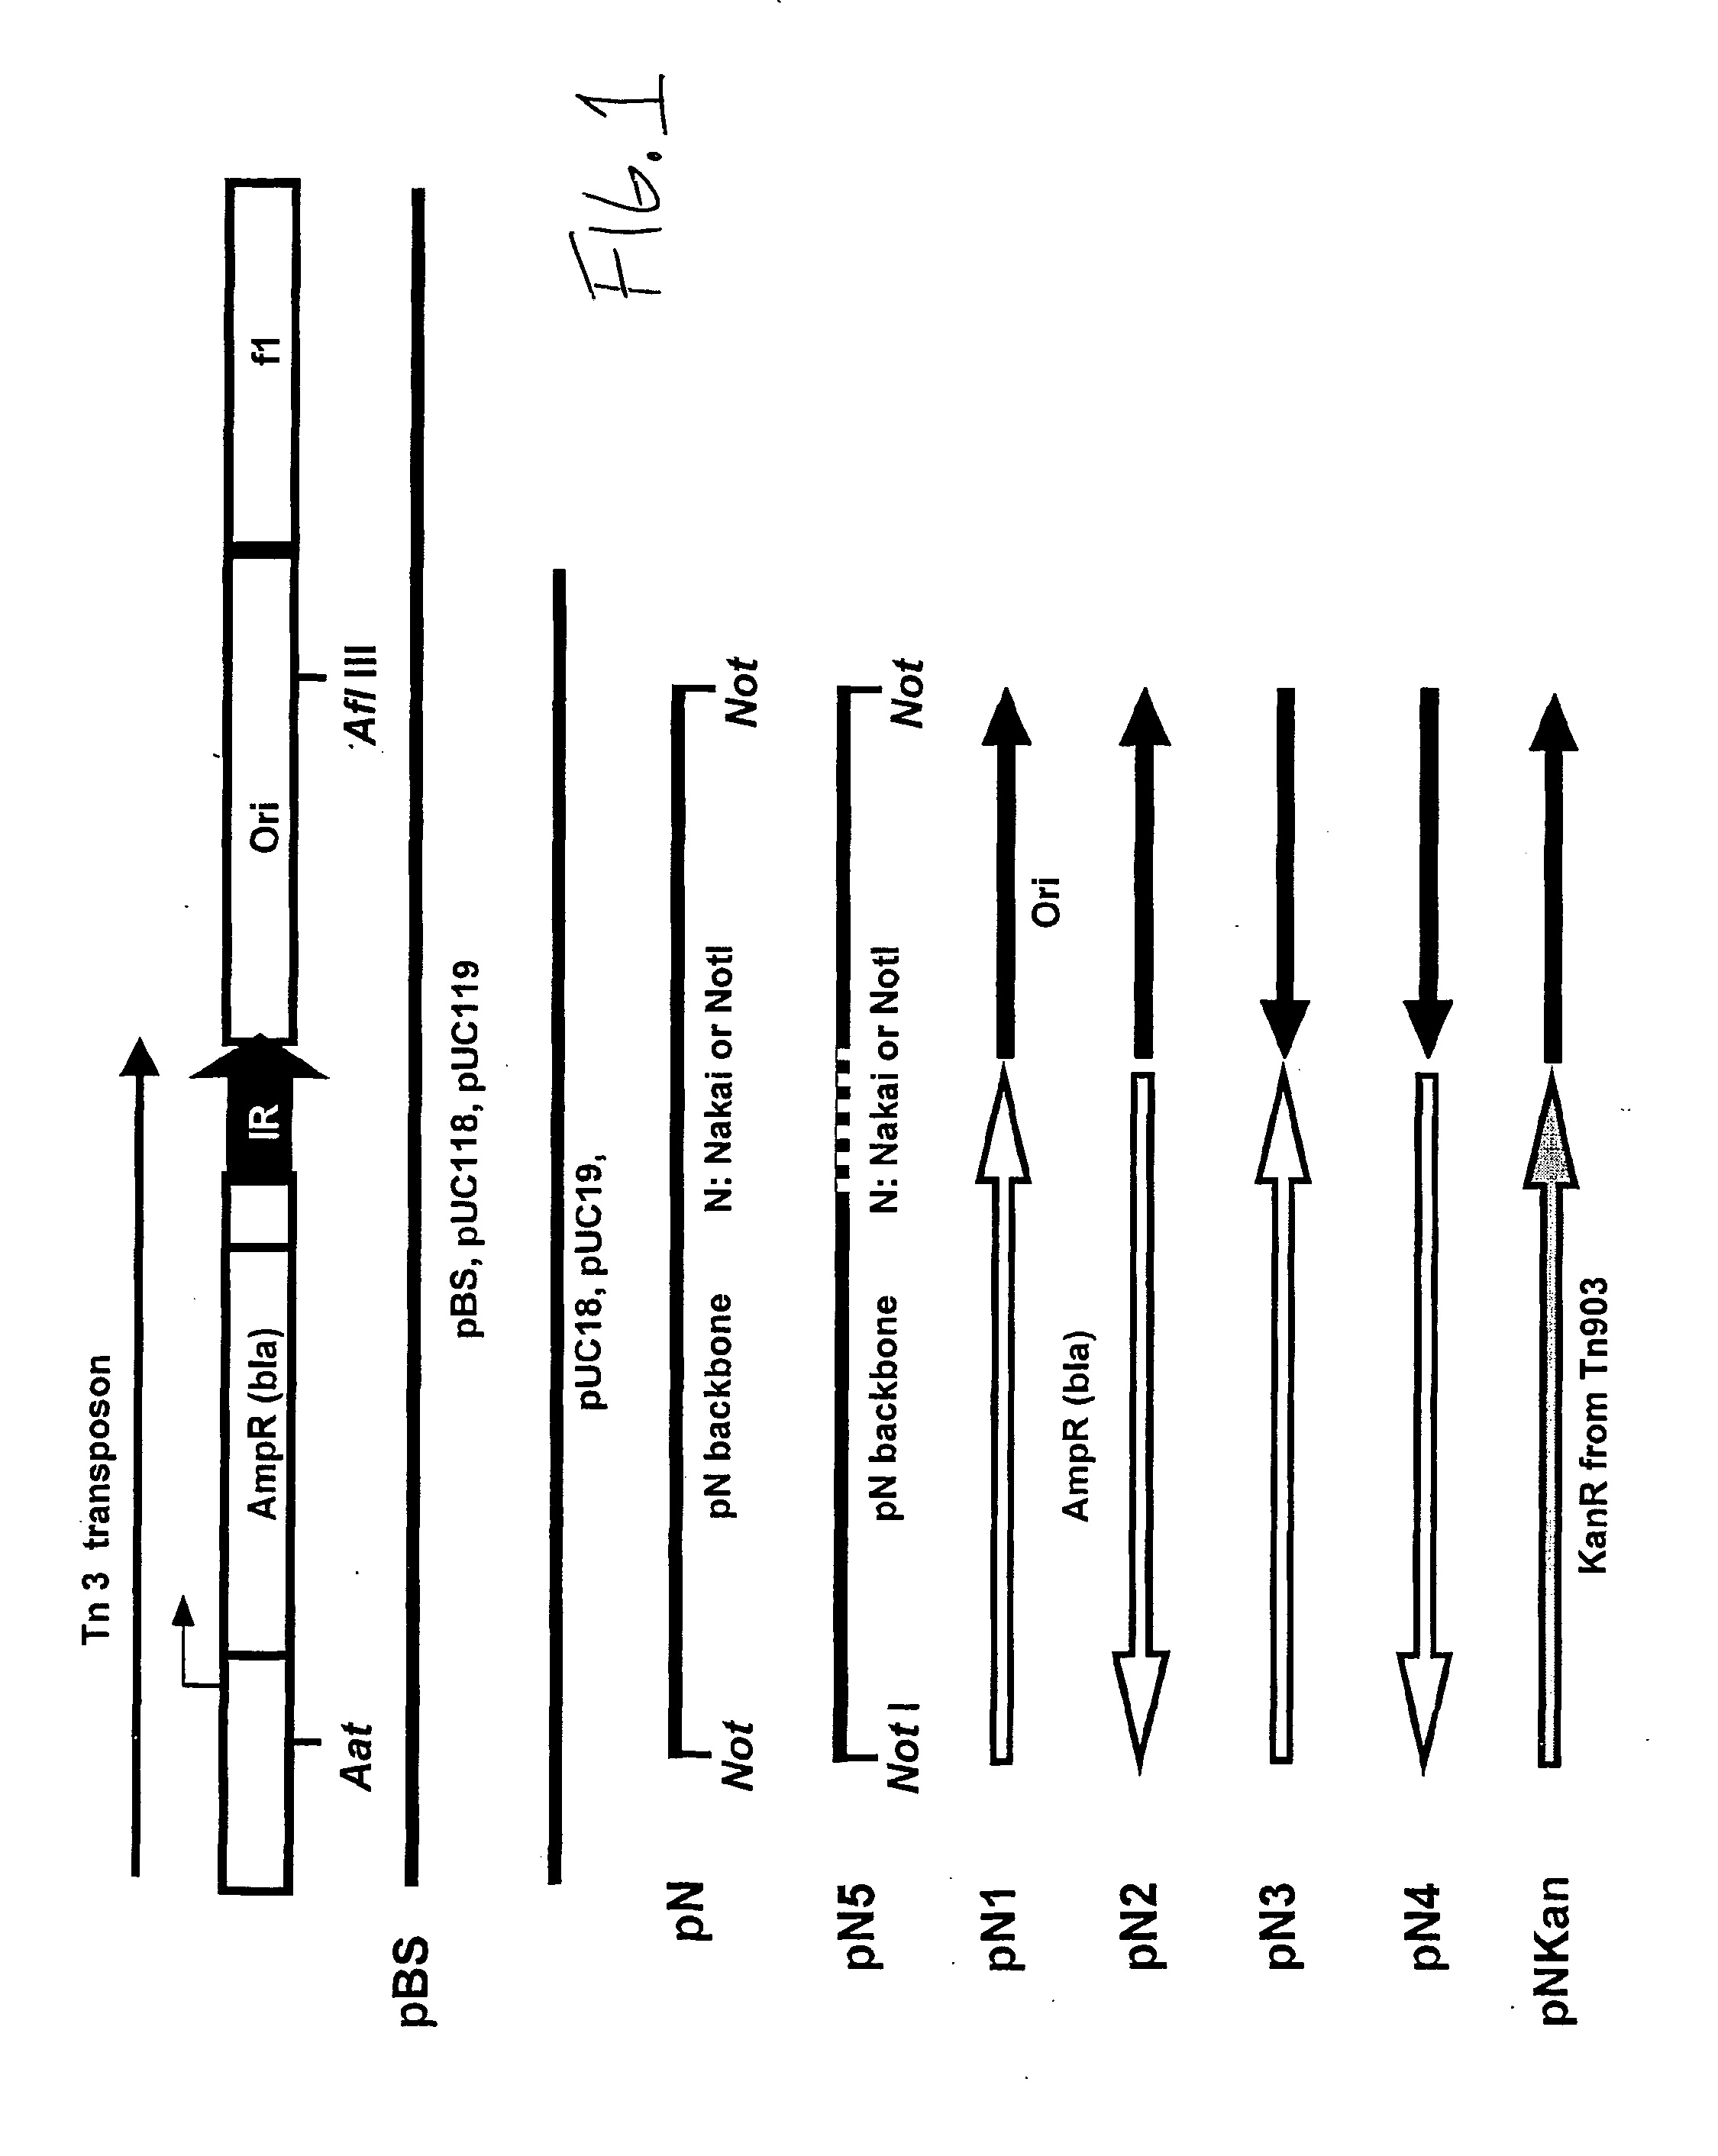 Minimal plasmid vectors that provide for persistent and high level gene expression and methods for using the same